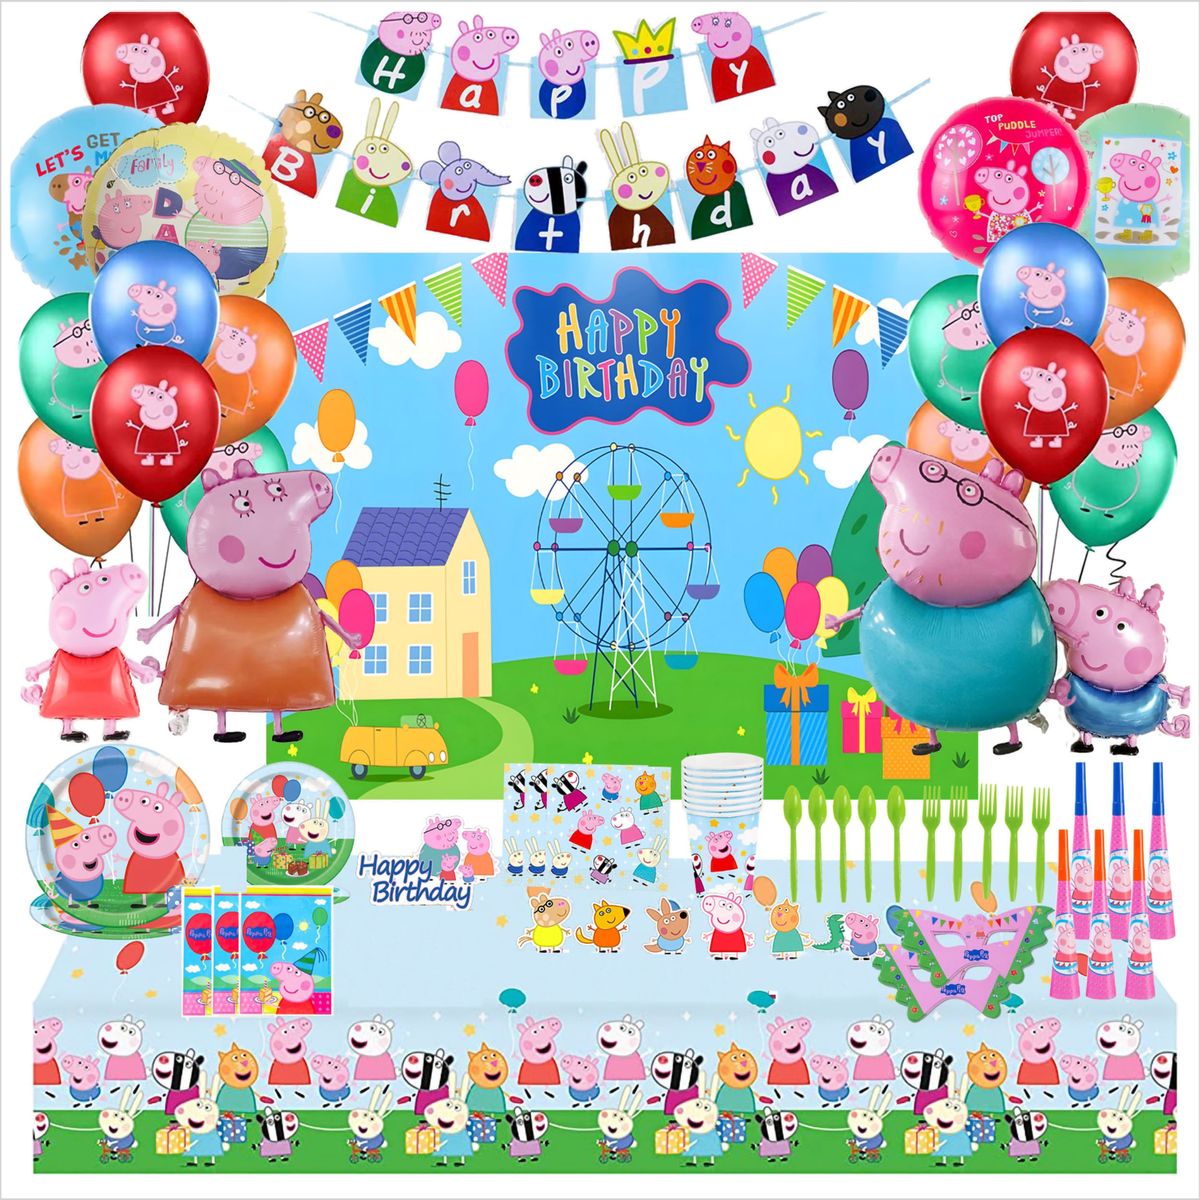 Peppa Pig Birthday Party Decorations Supplies 244 Pieces